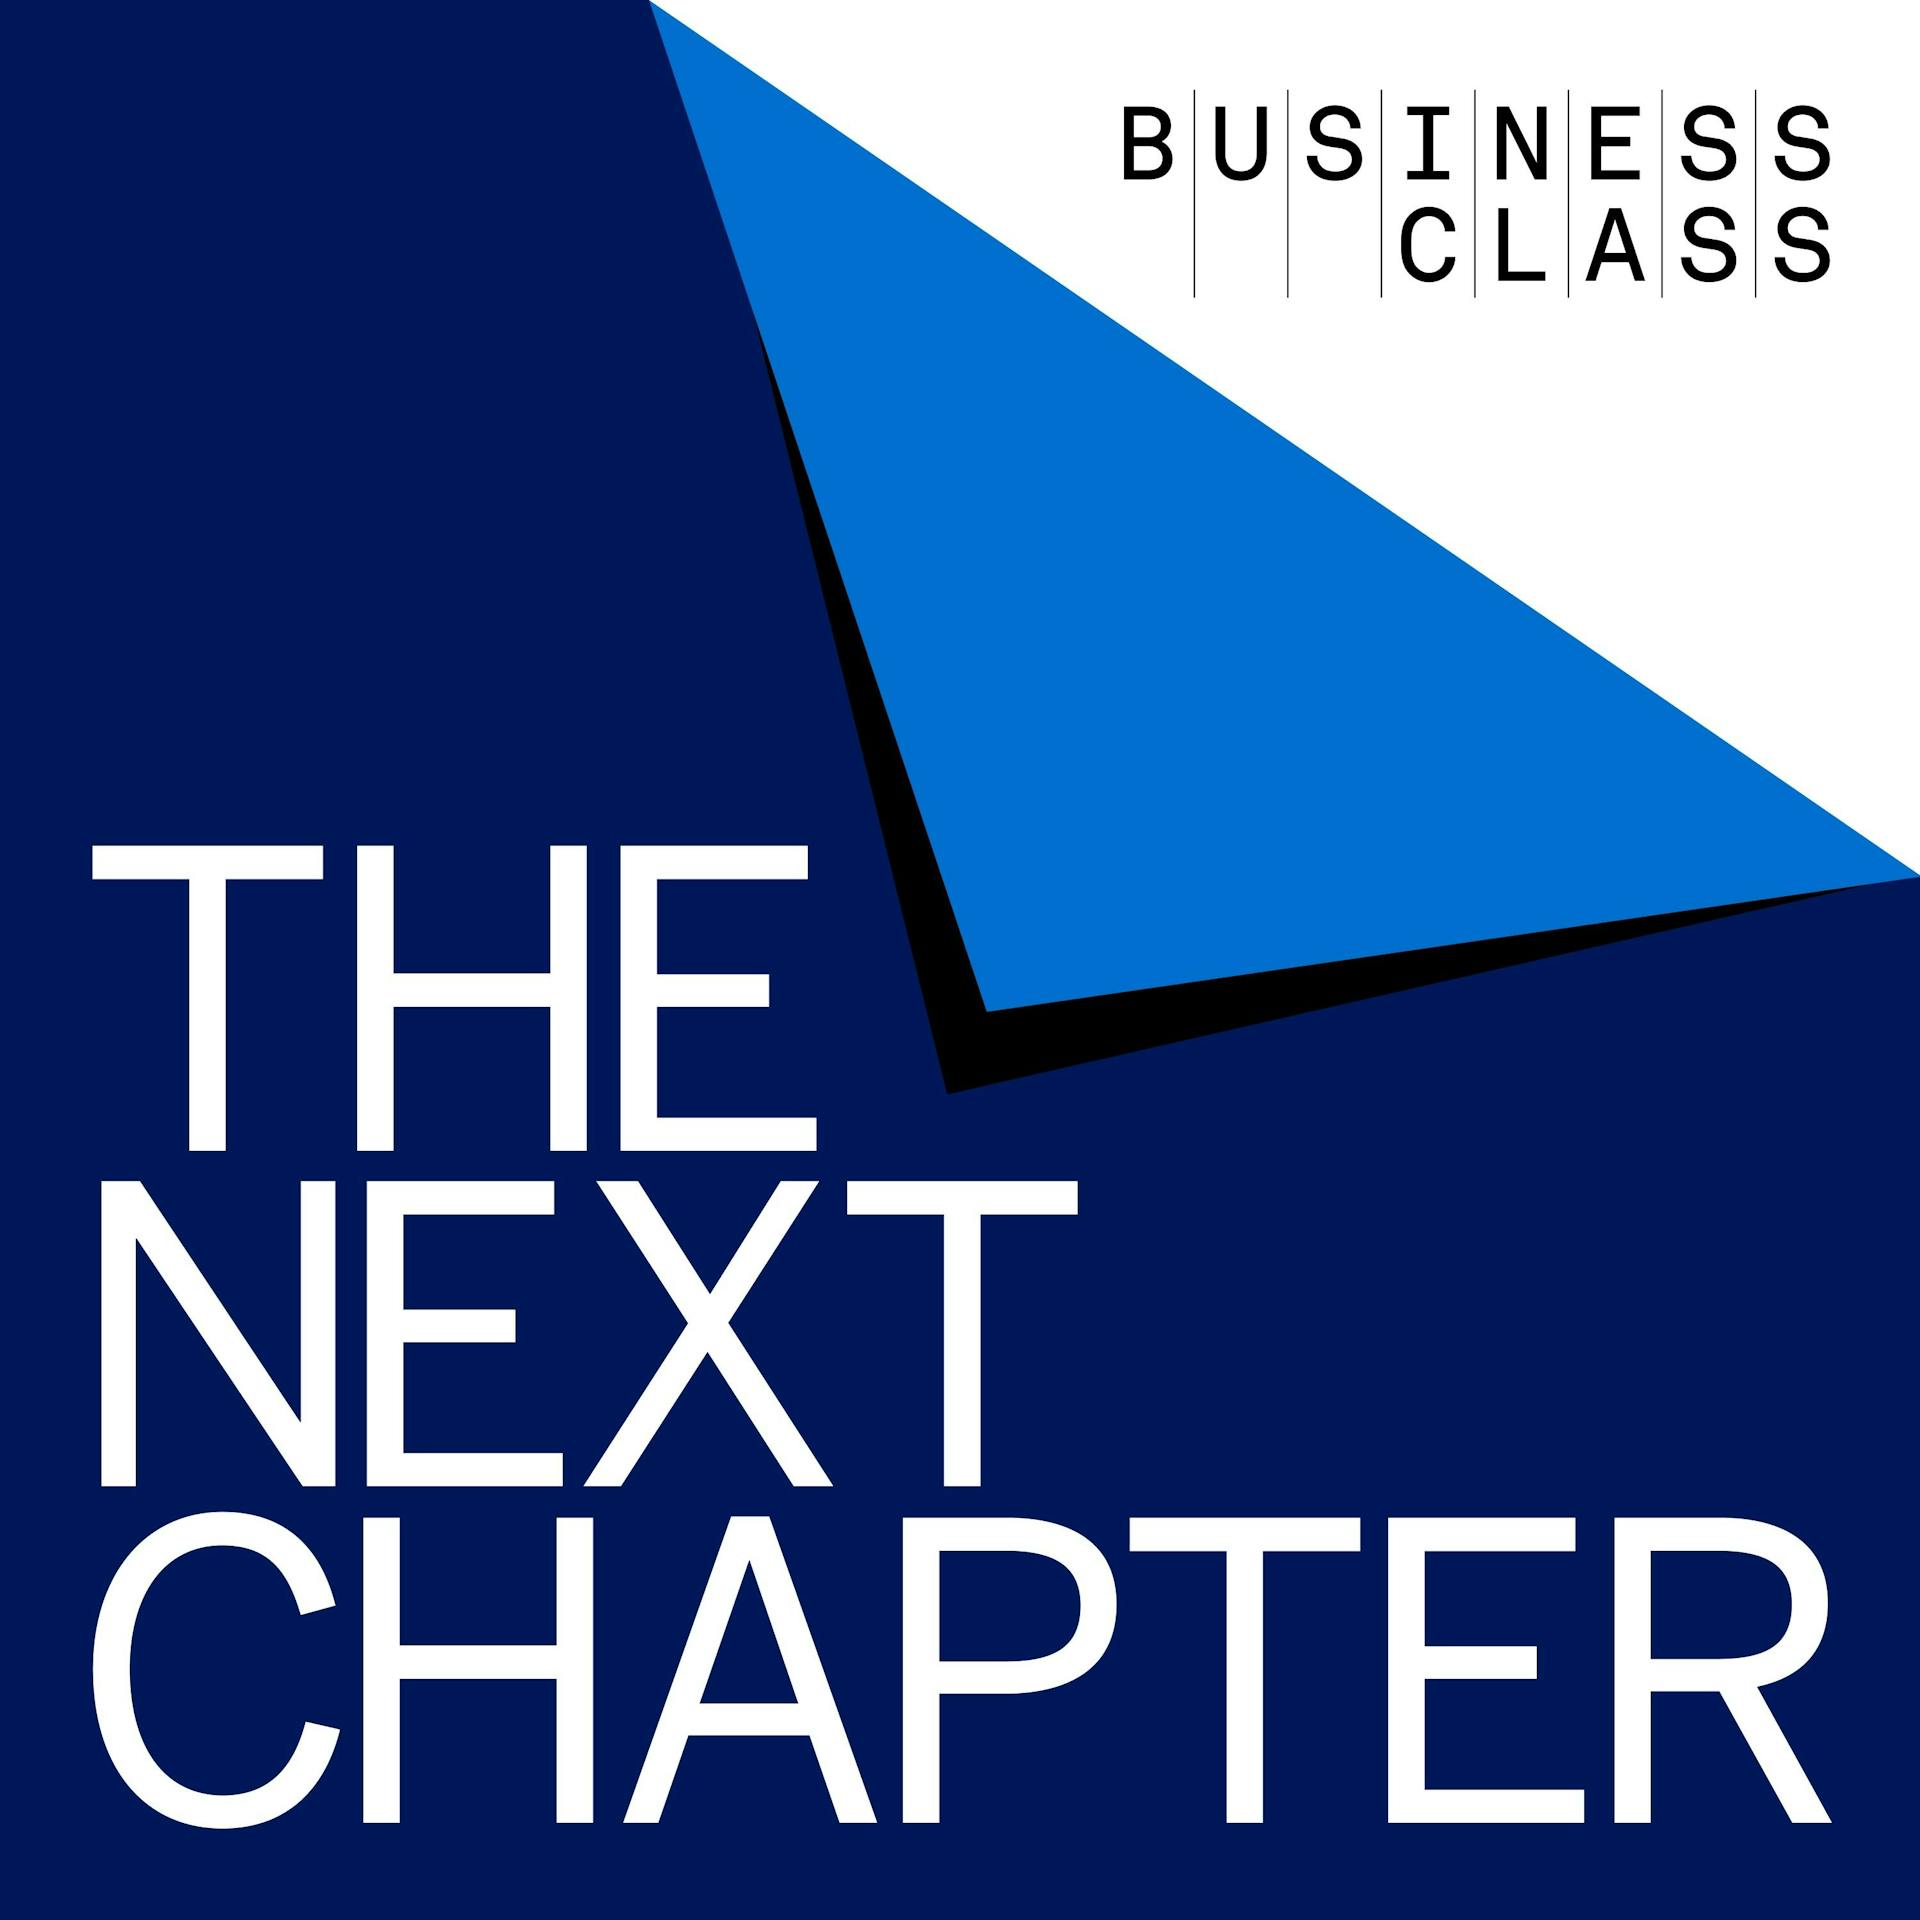 Review: The Next Chapter by American Express